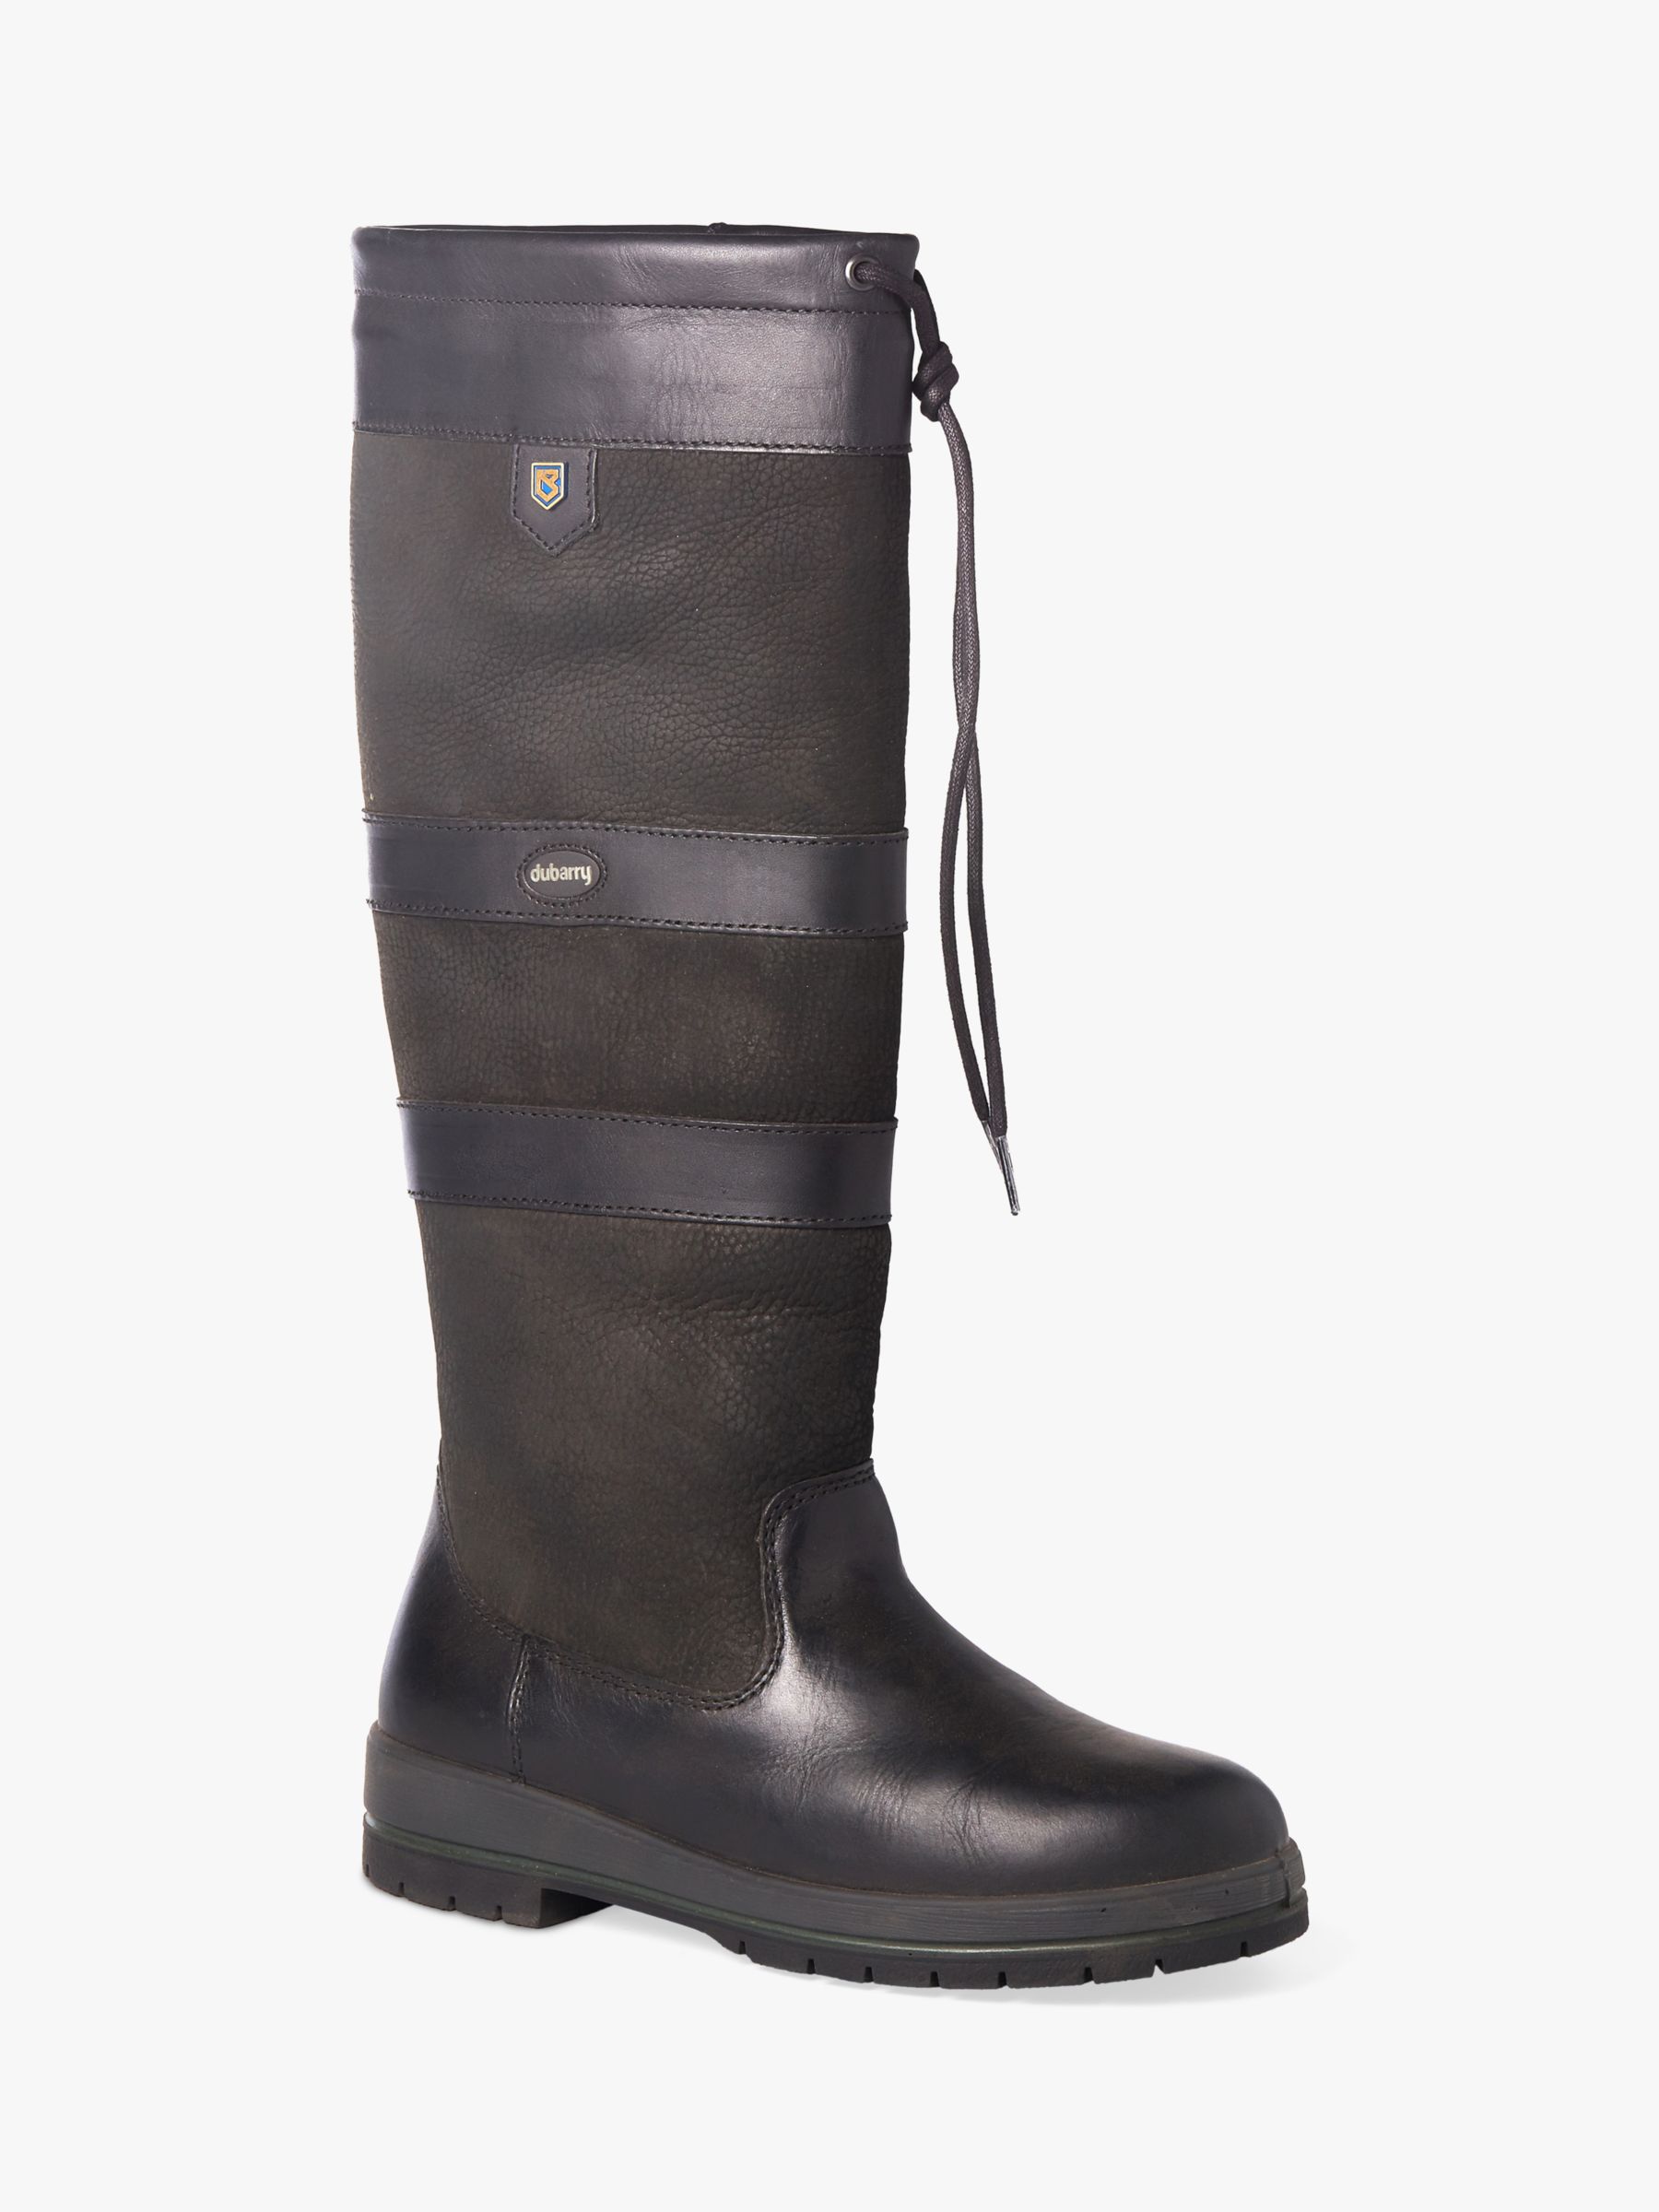 Dubarry Galway Leather Knee Boots, Black, 4